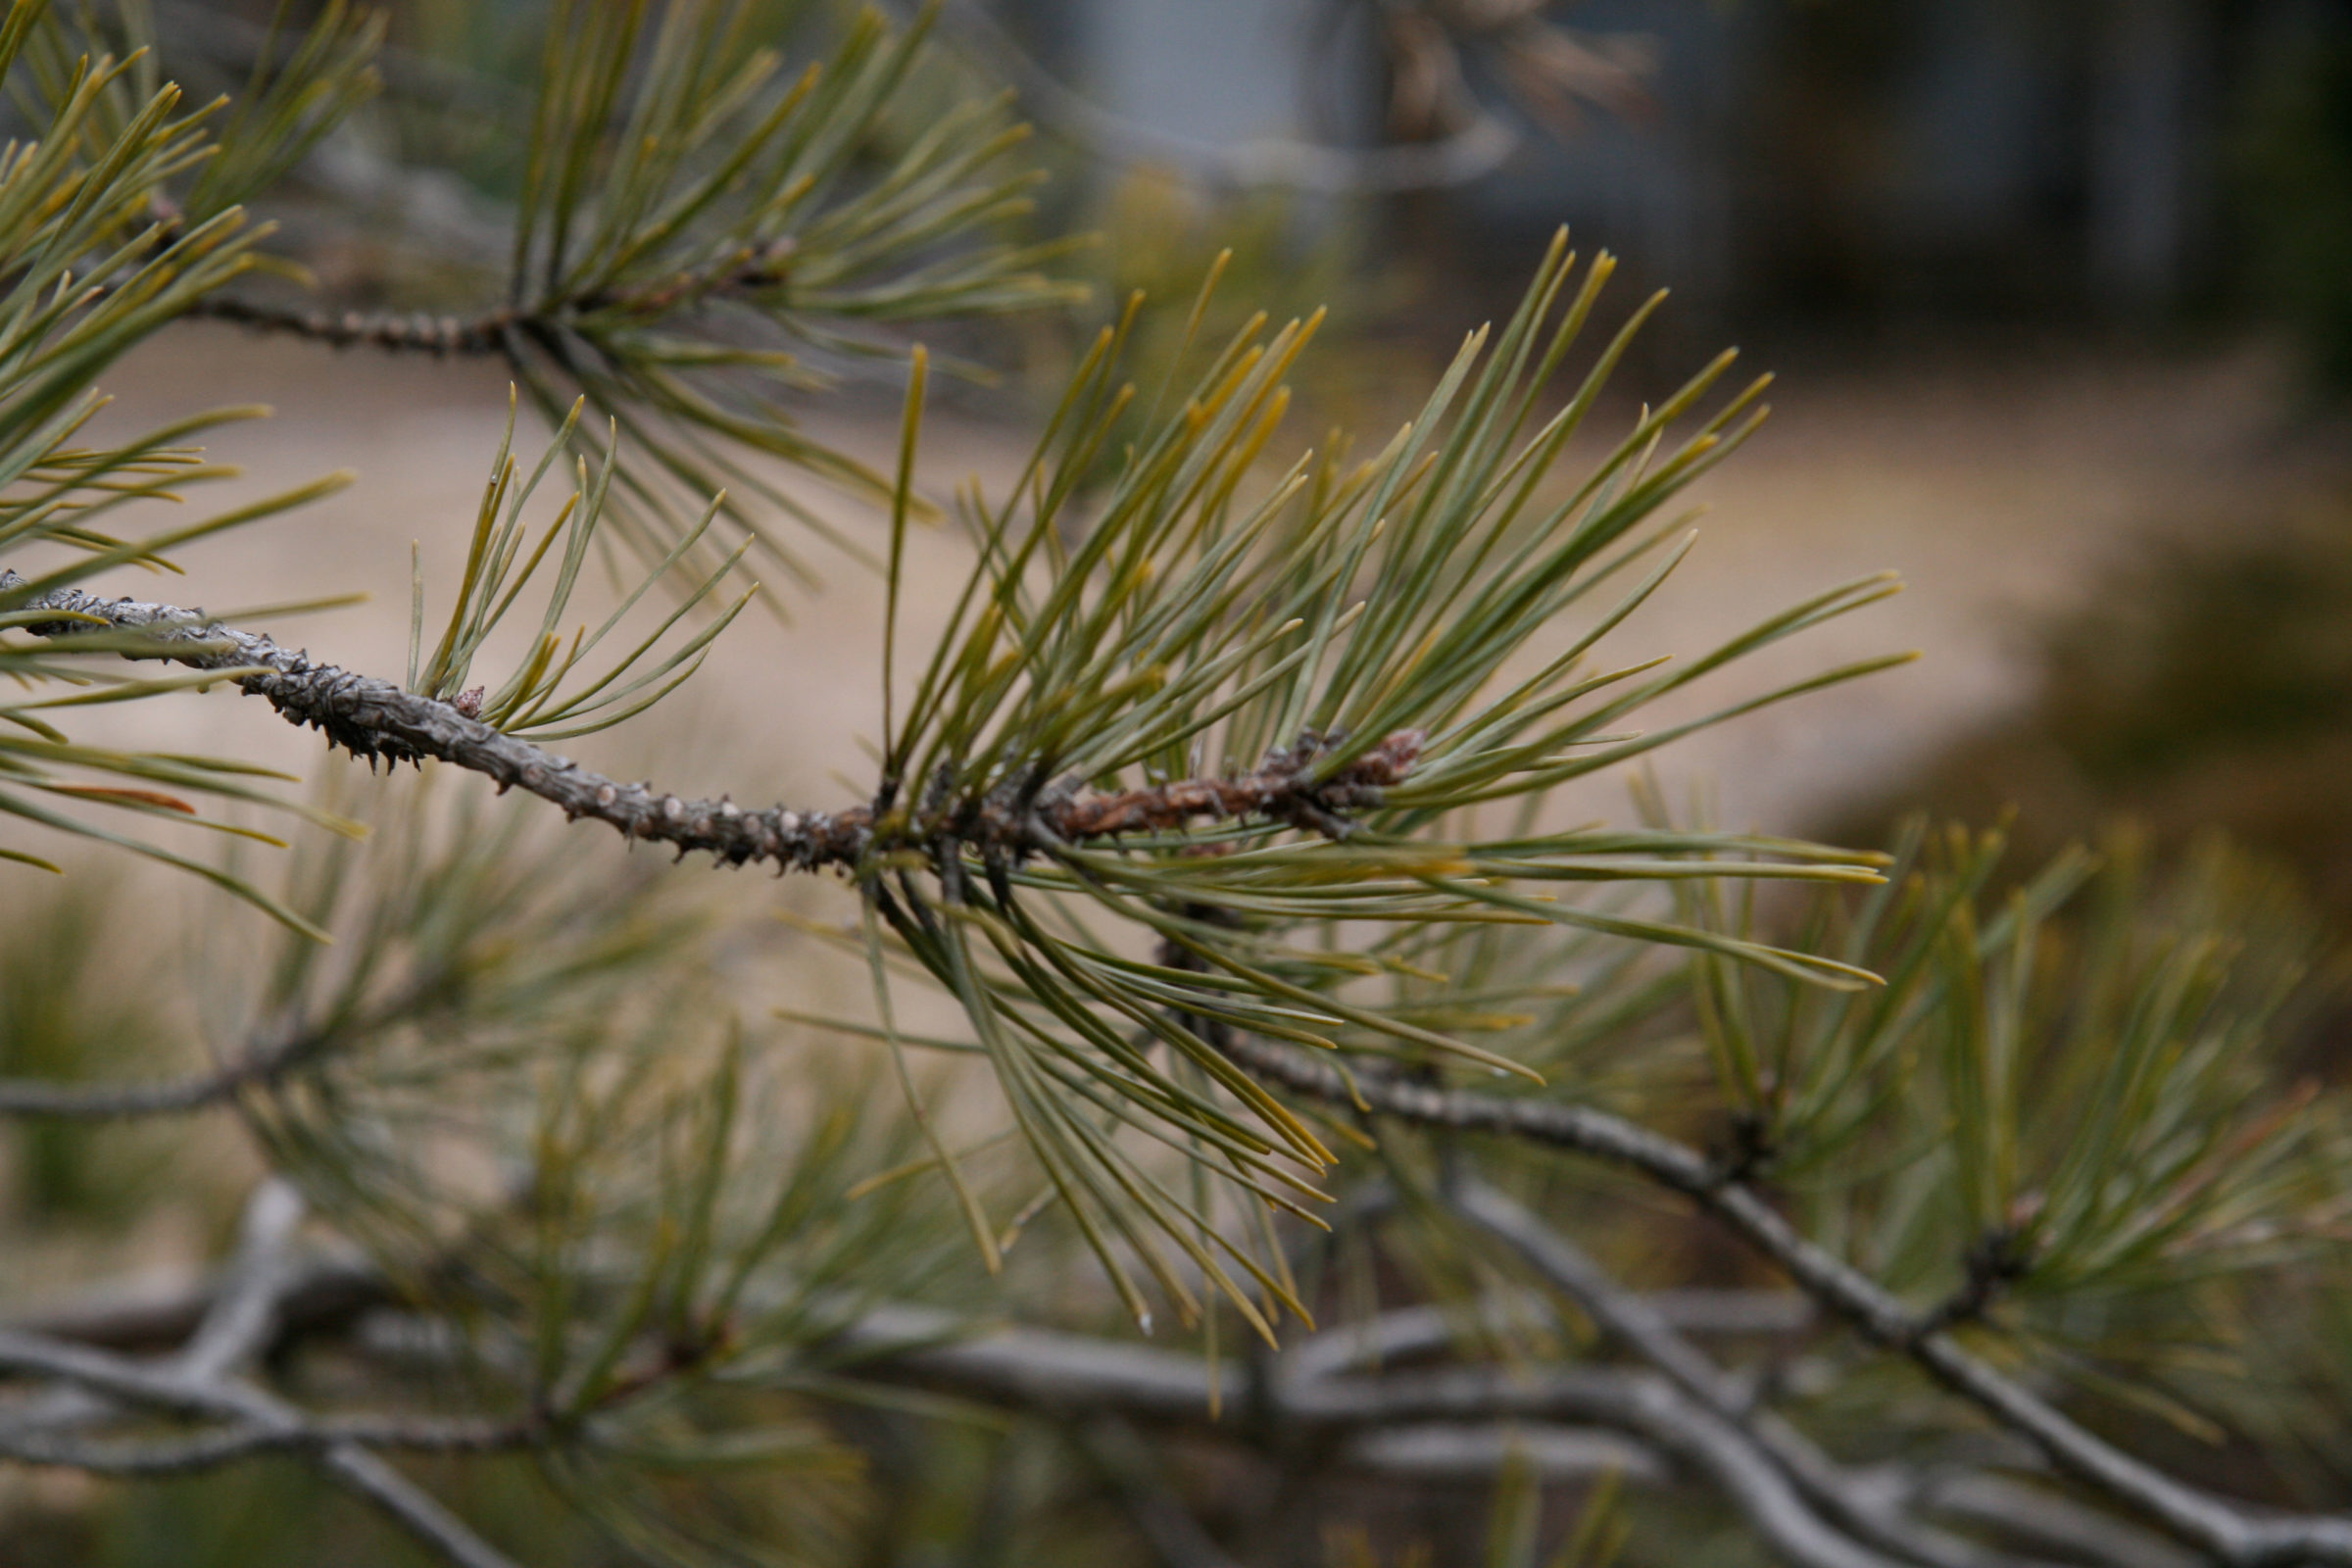 Pitch Pine branches and needles